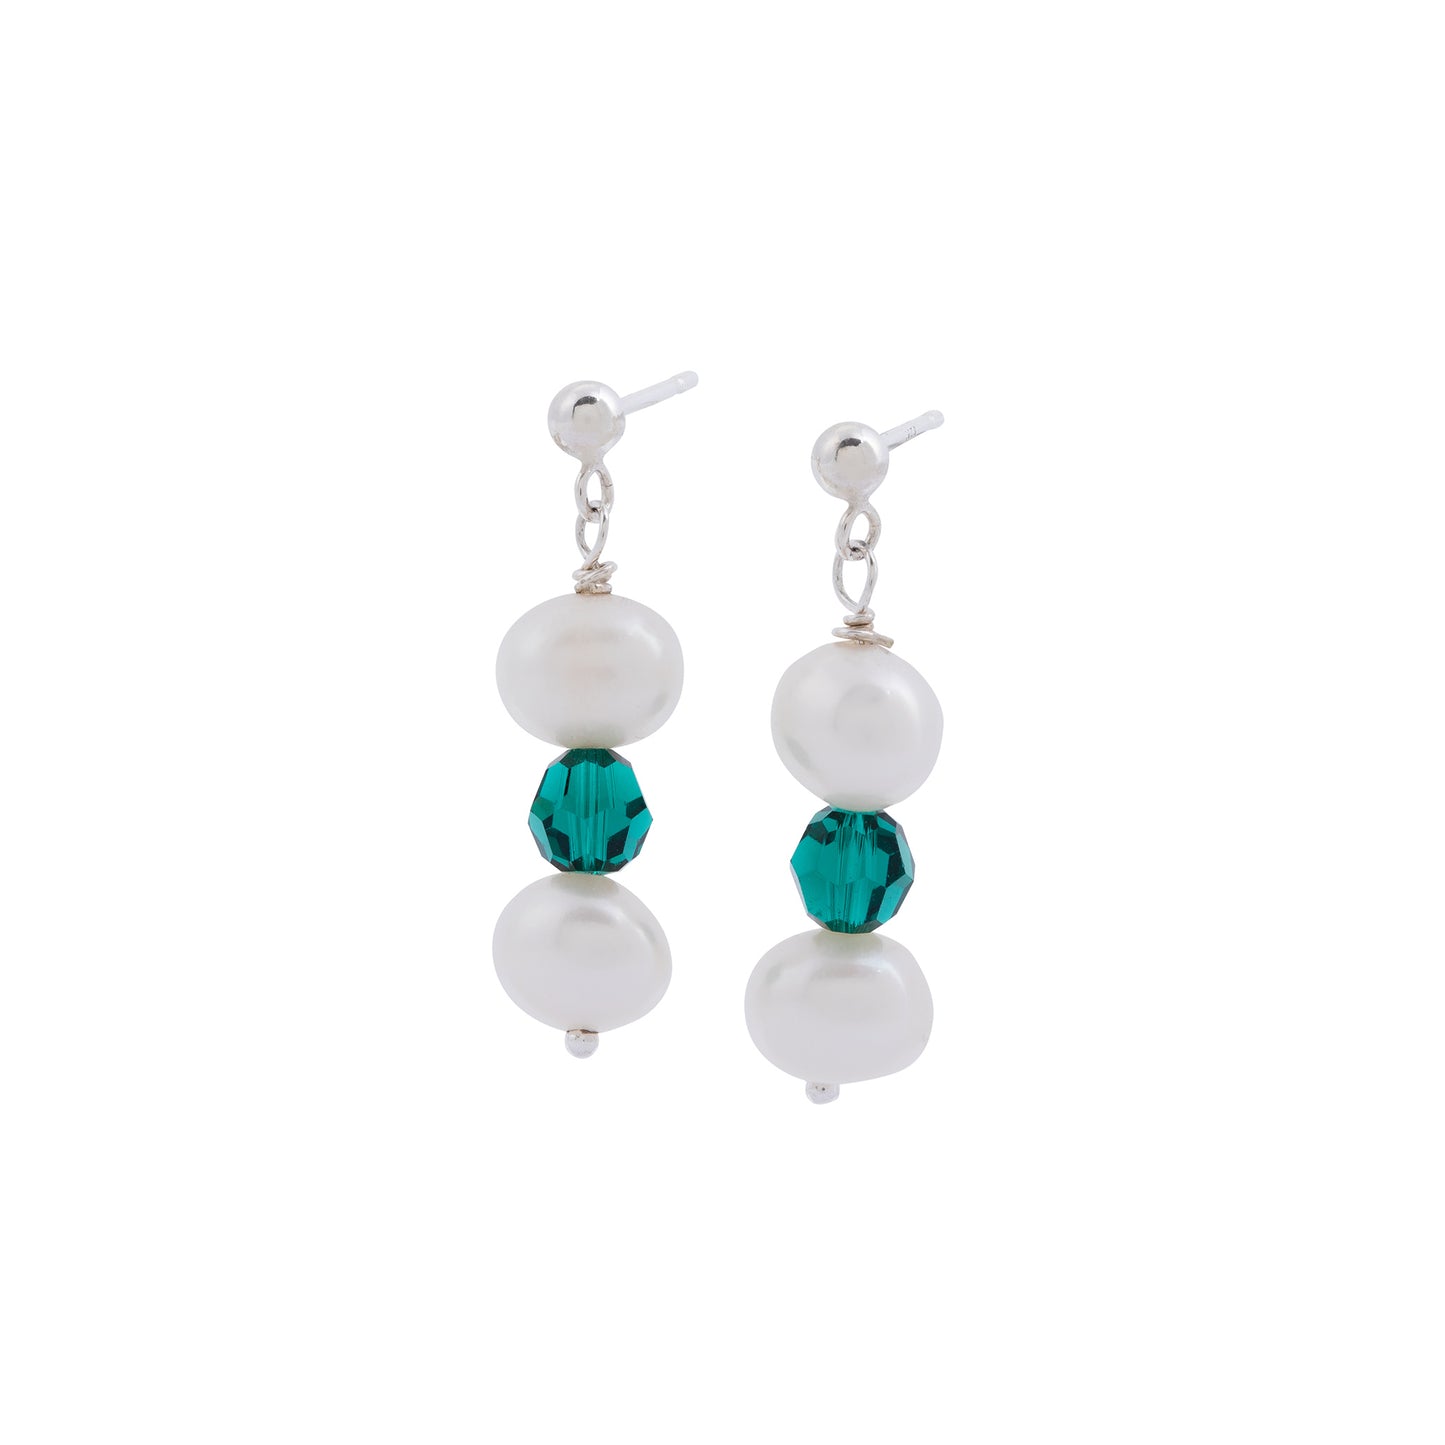 A pair of elegant Pearl and Emerald Earrings by Made Here with Love featuring two white freshwater pearls and a single green crystal bead in the center. The earrings hang from small sterling silver studs.